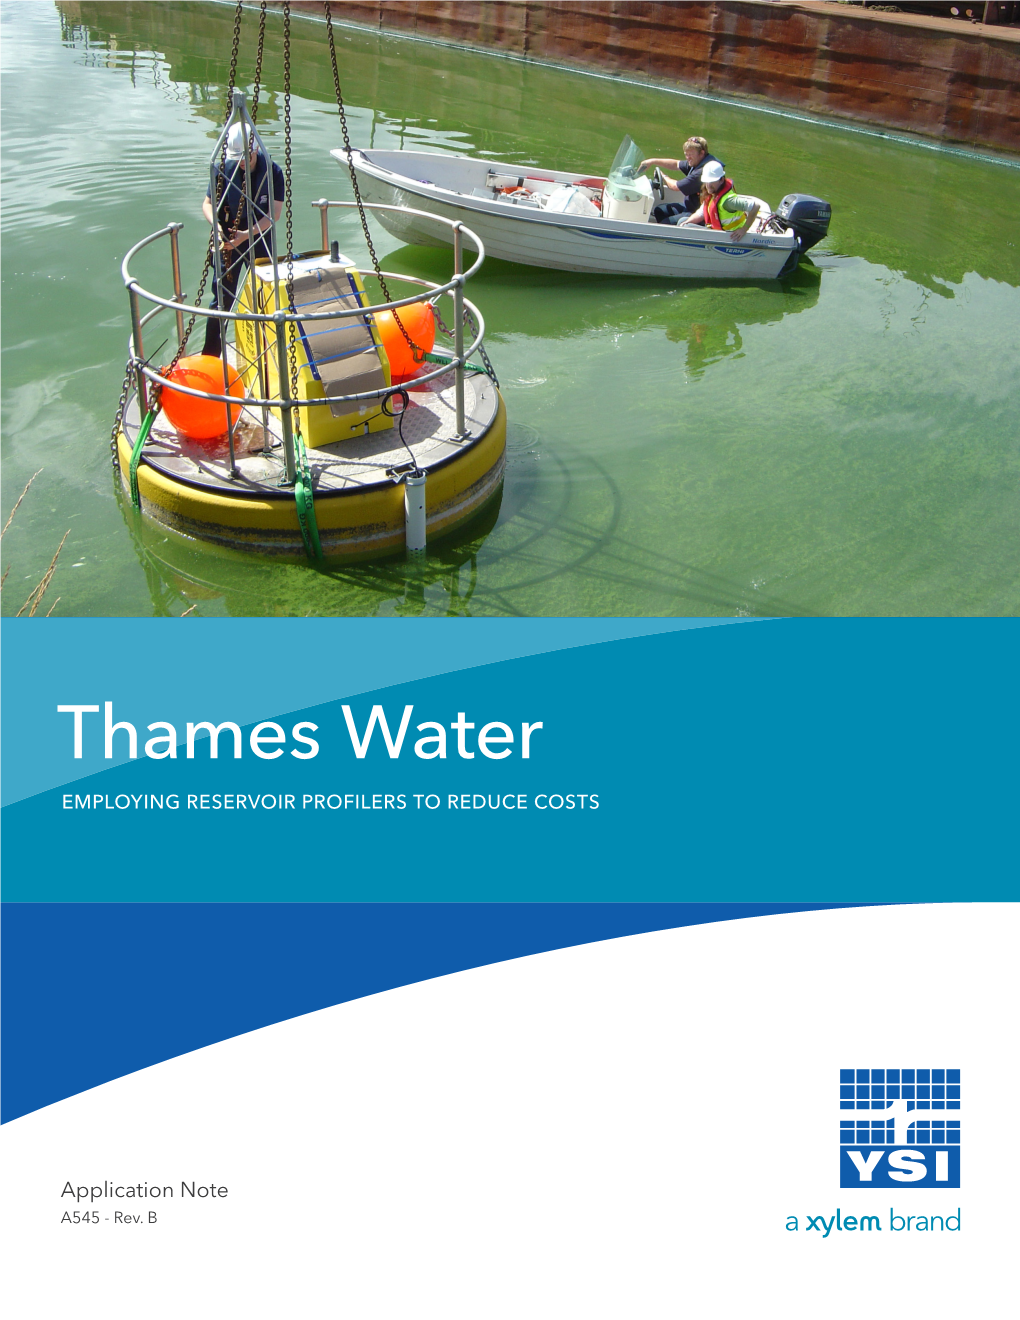 Thames Water EMPLOYING RESERVOIR PROFILERS to REDUCE COSTS